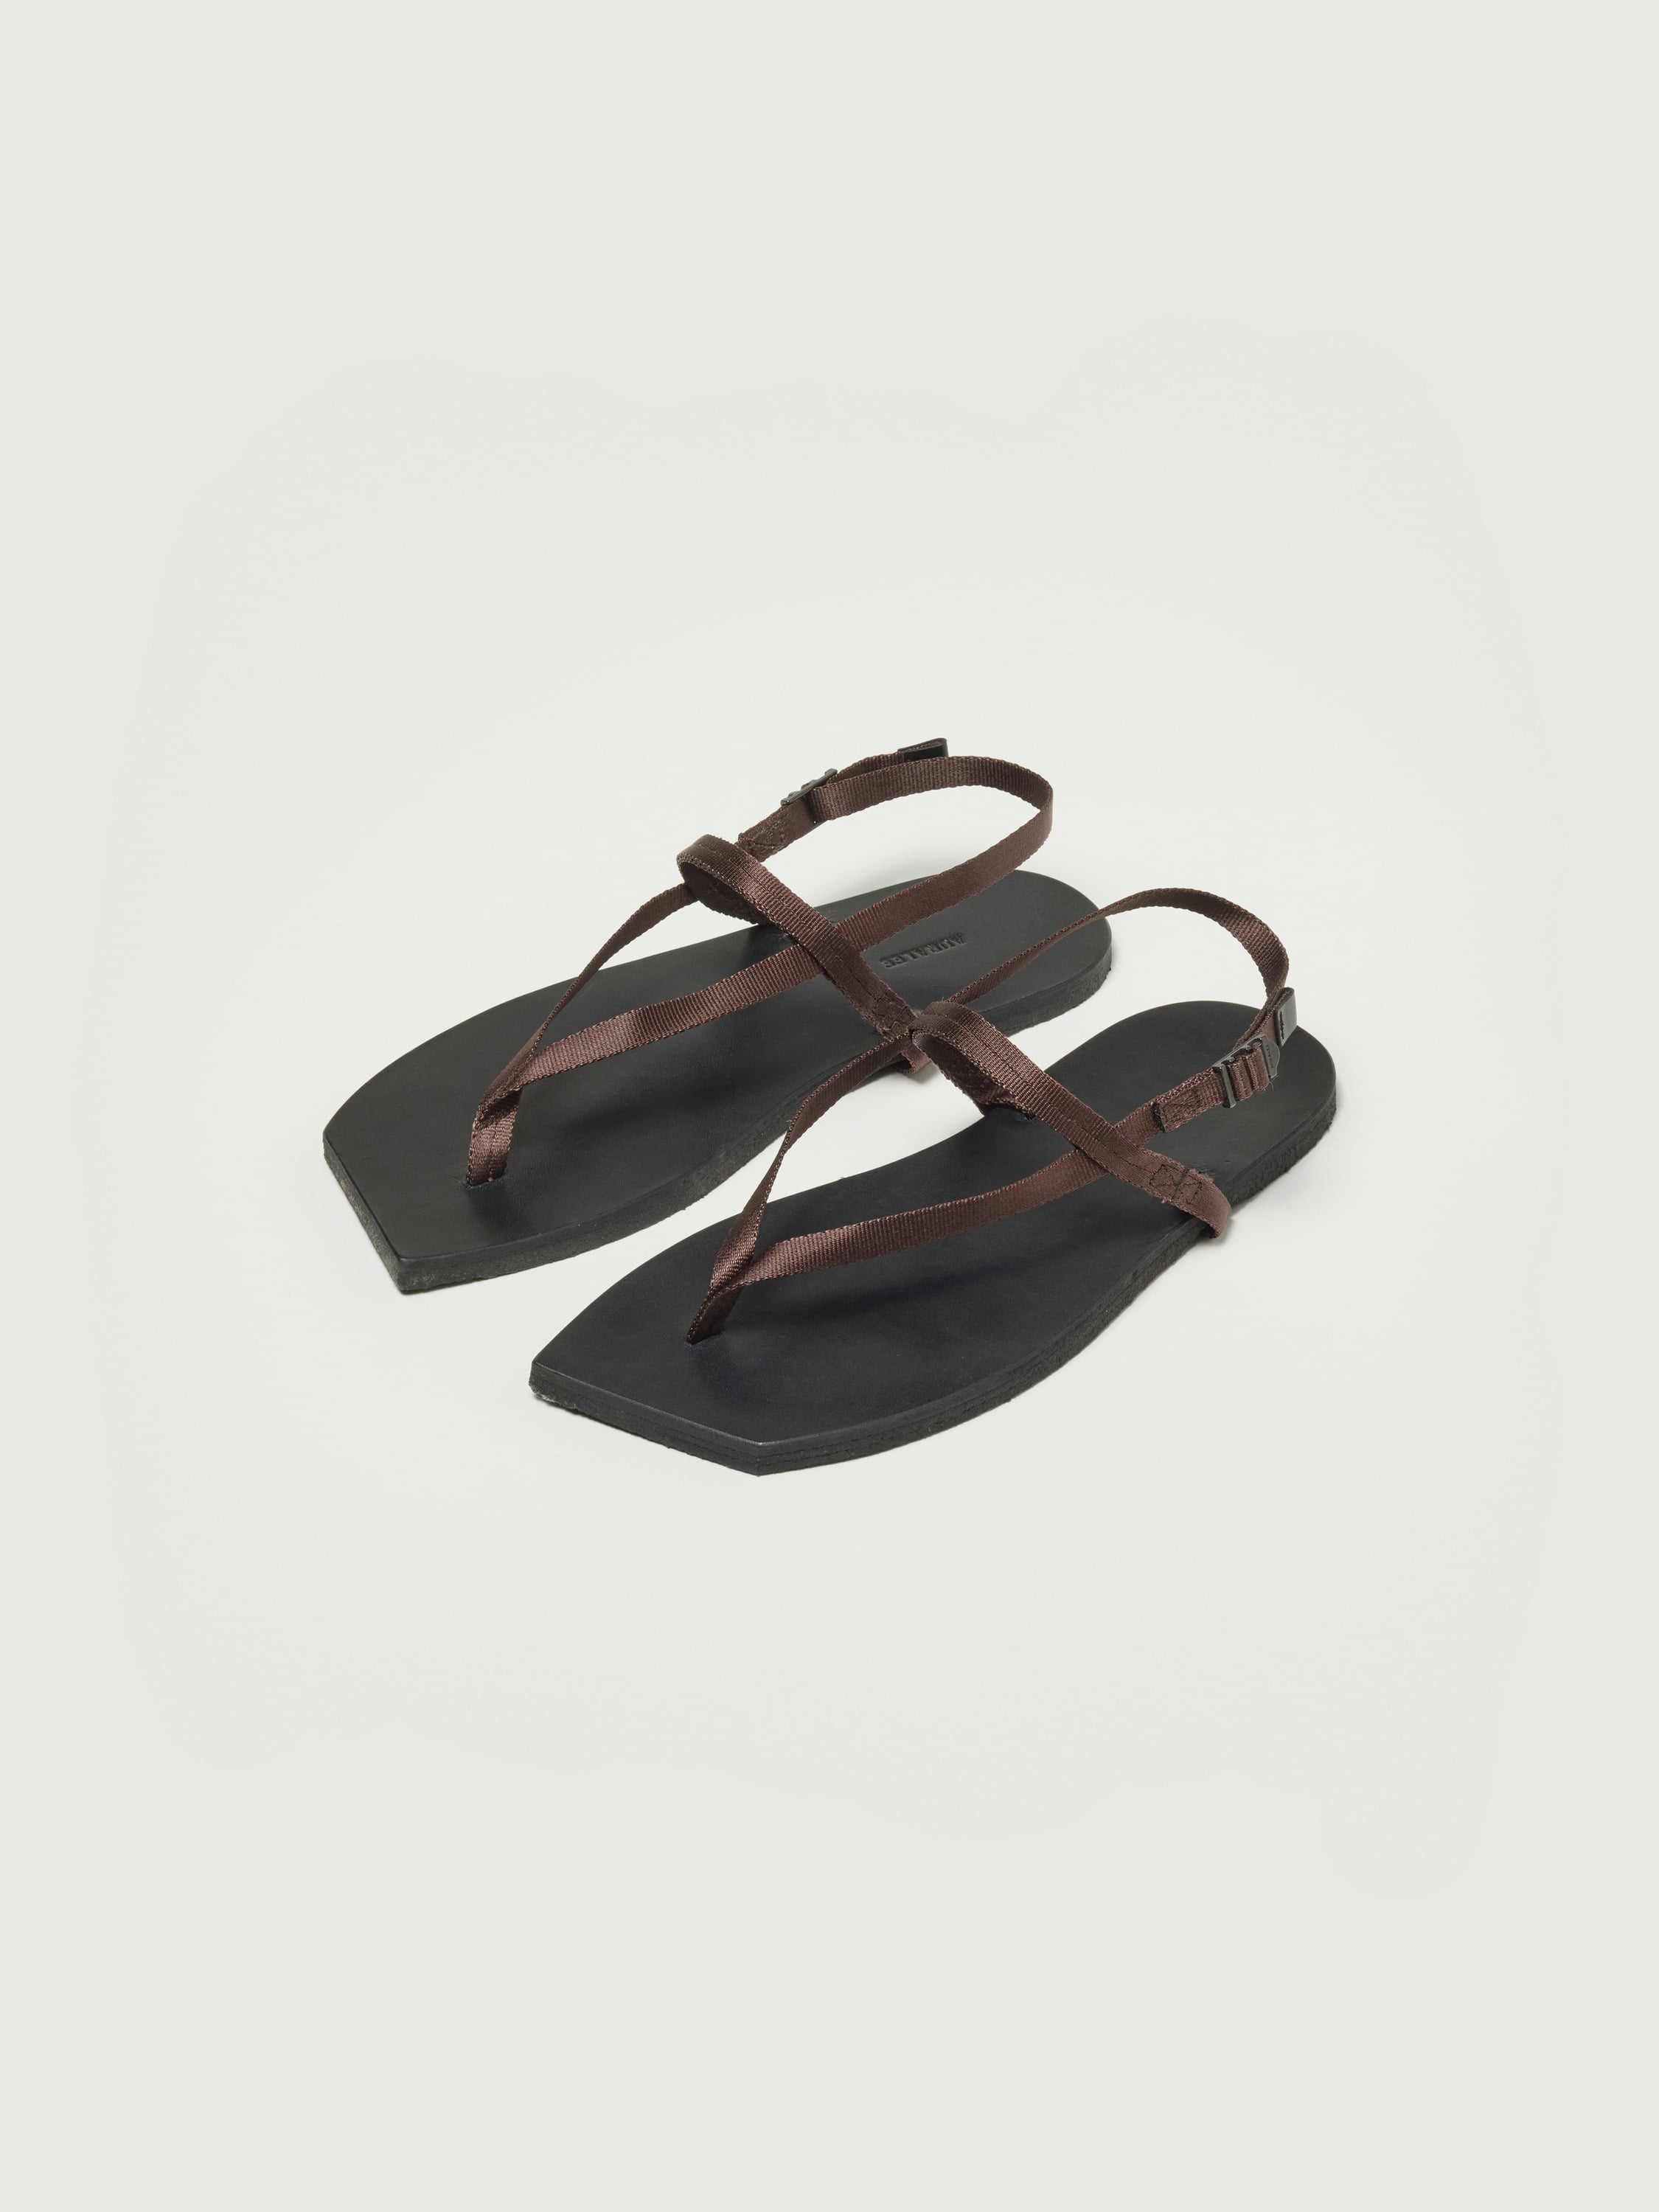 BELTED LEATHER SANDALS MADE BY FOOT THE COACHER 詳細画像 BLACK 2